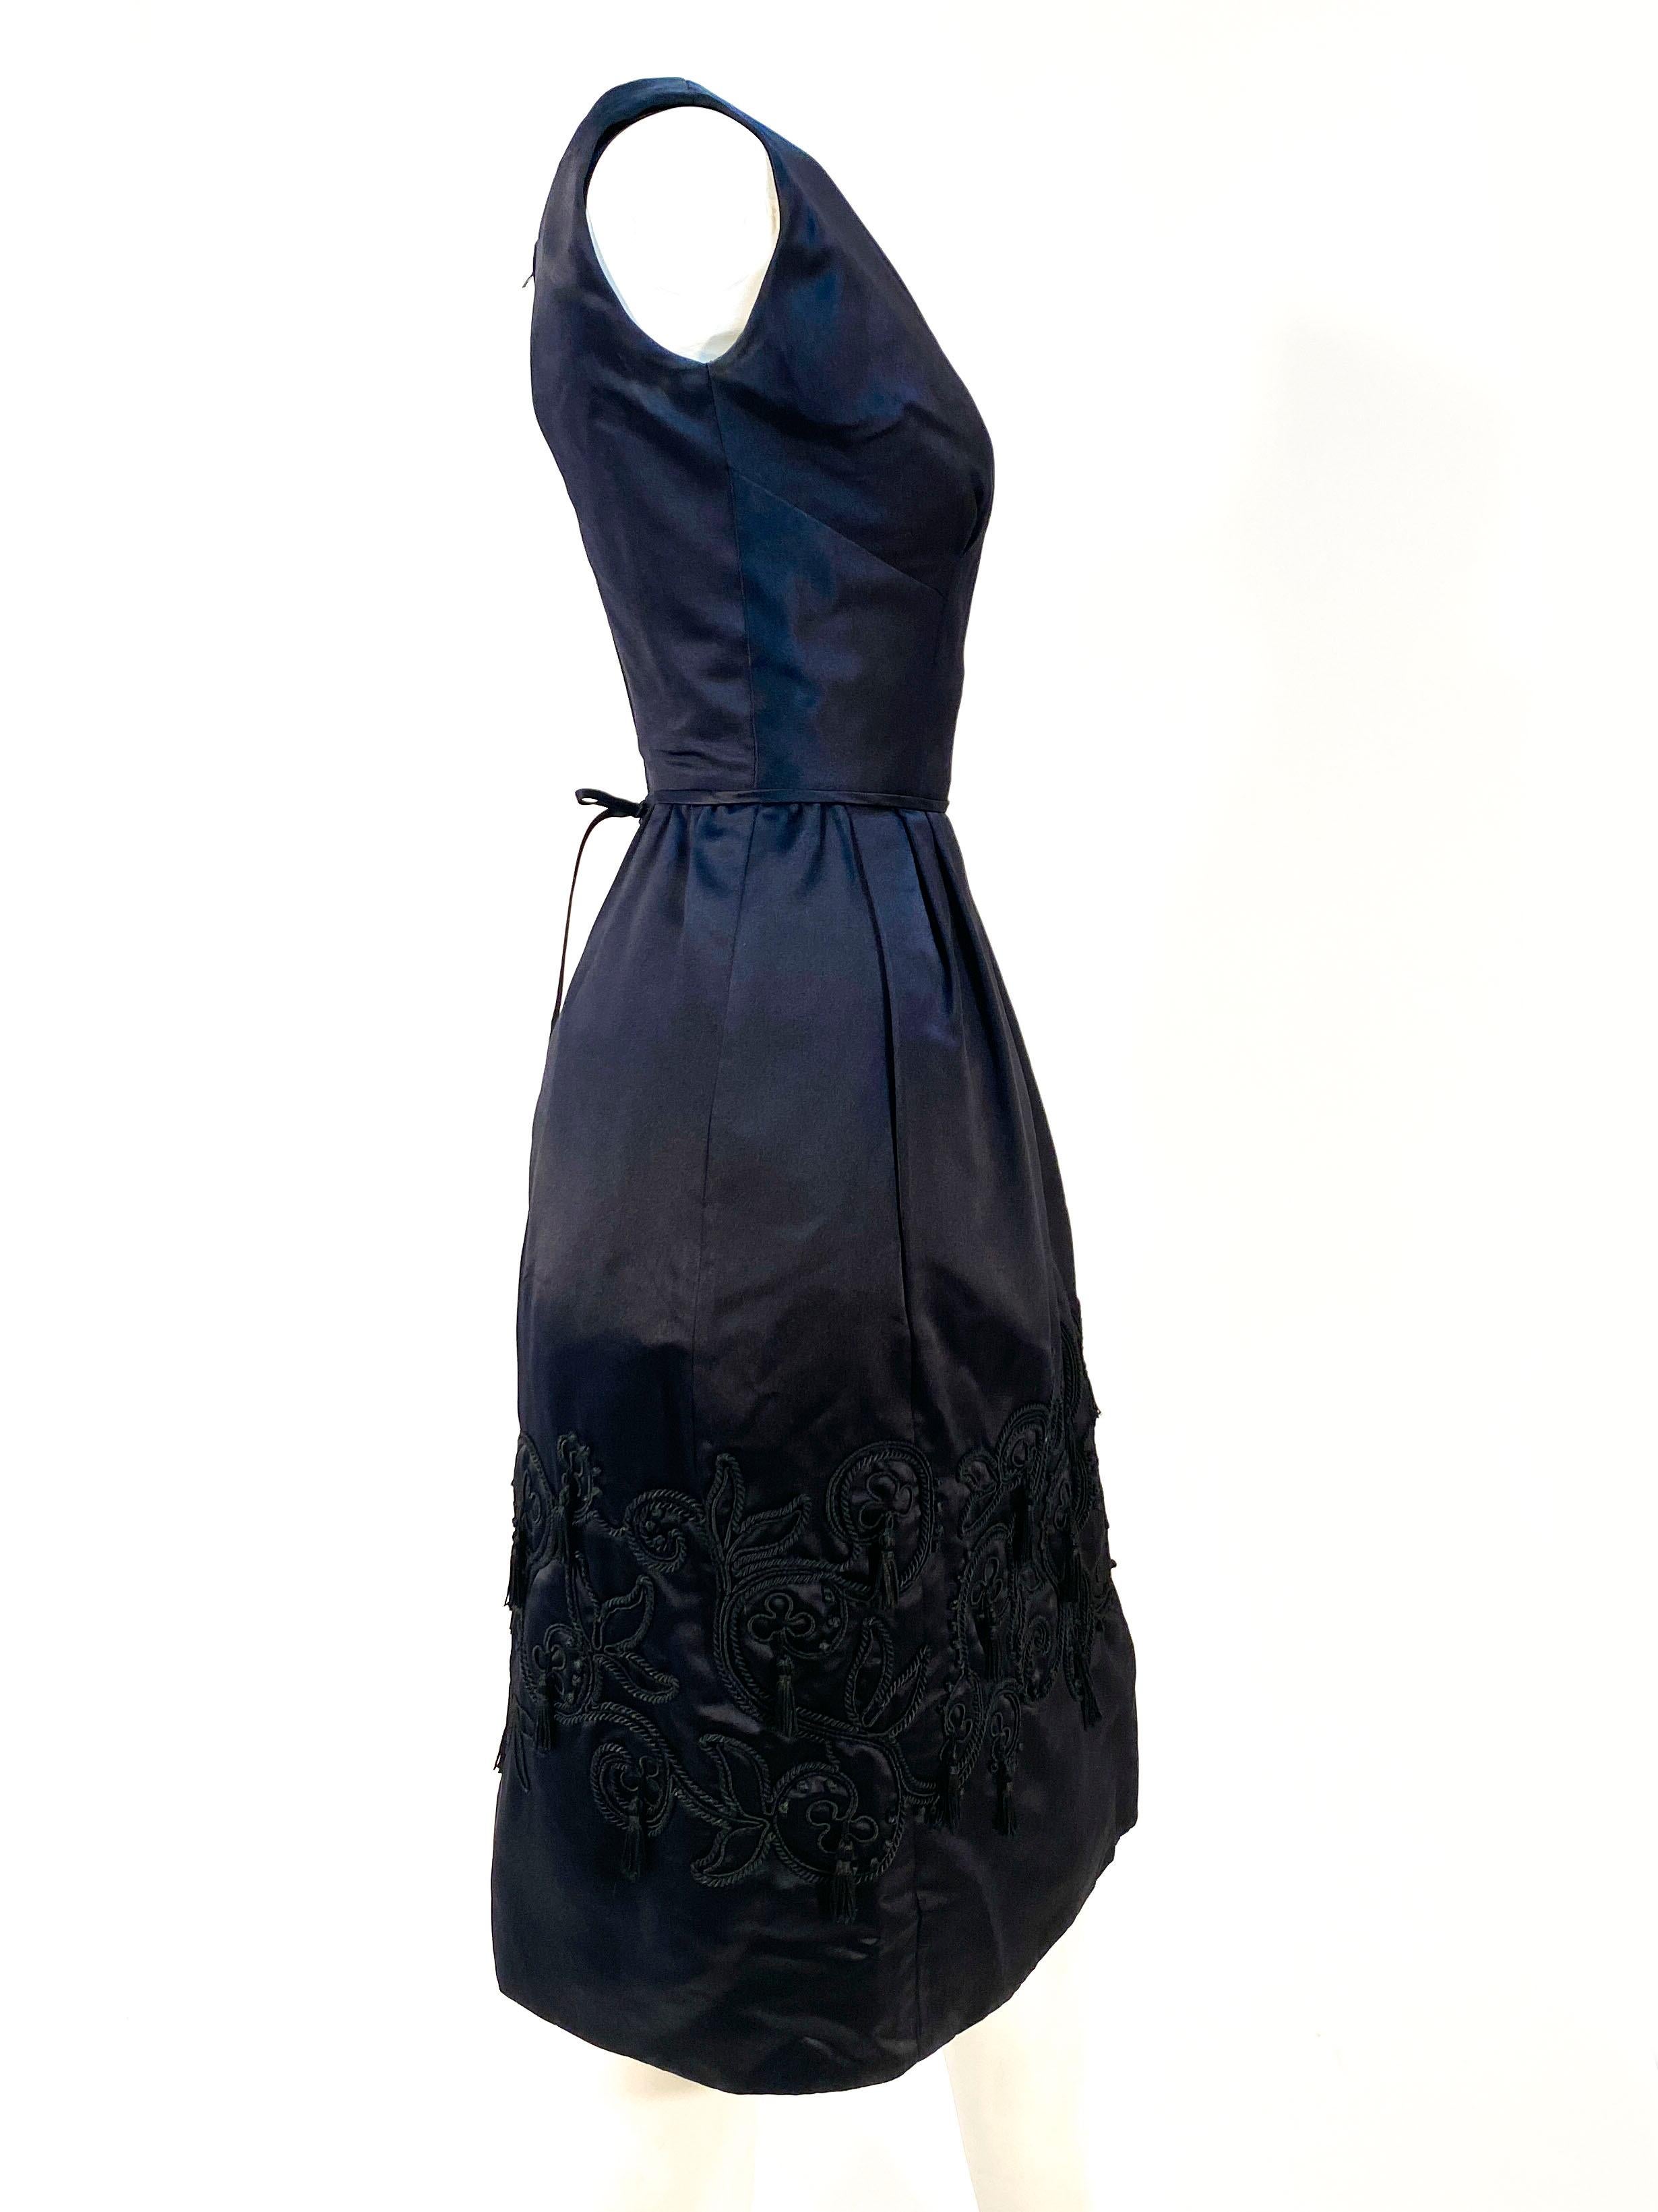 1960s Black Silk Satin Cocktail Dress with Embroidered Skirt In Good Condition For Sale In San Francisco, CA